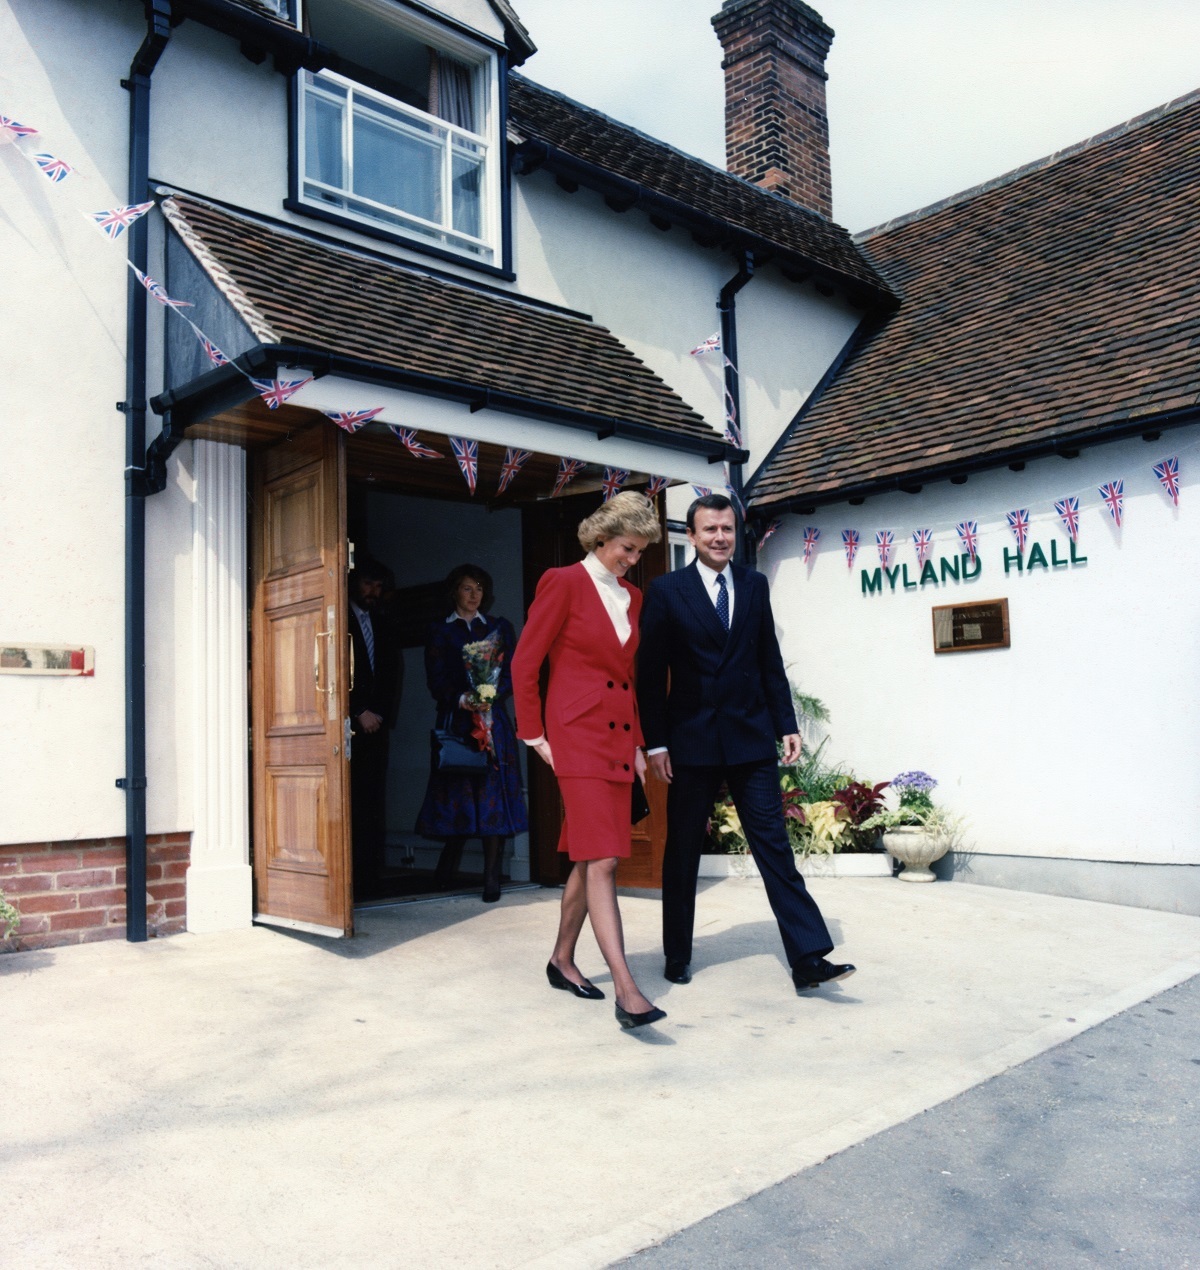 On her way - Princess Diana leaves the hospice after meeting hospice inpatients. She is pictured with chairman Christopher Holmes